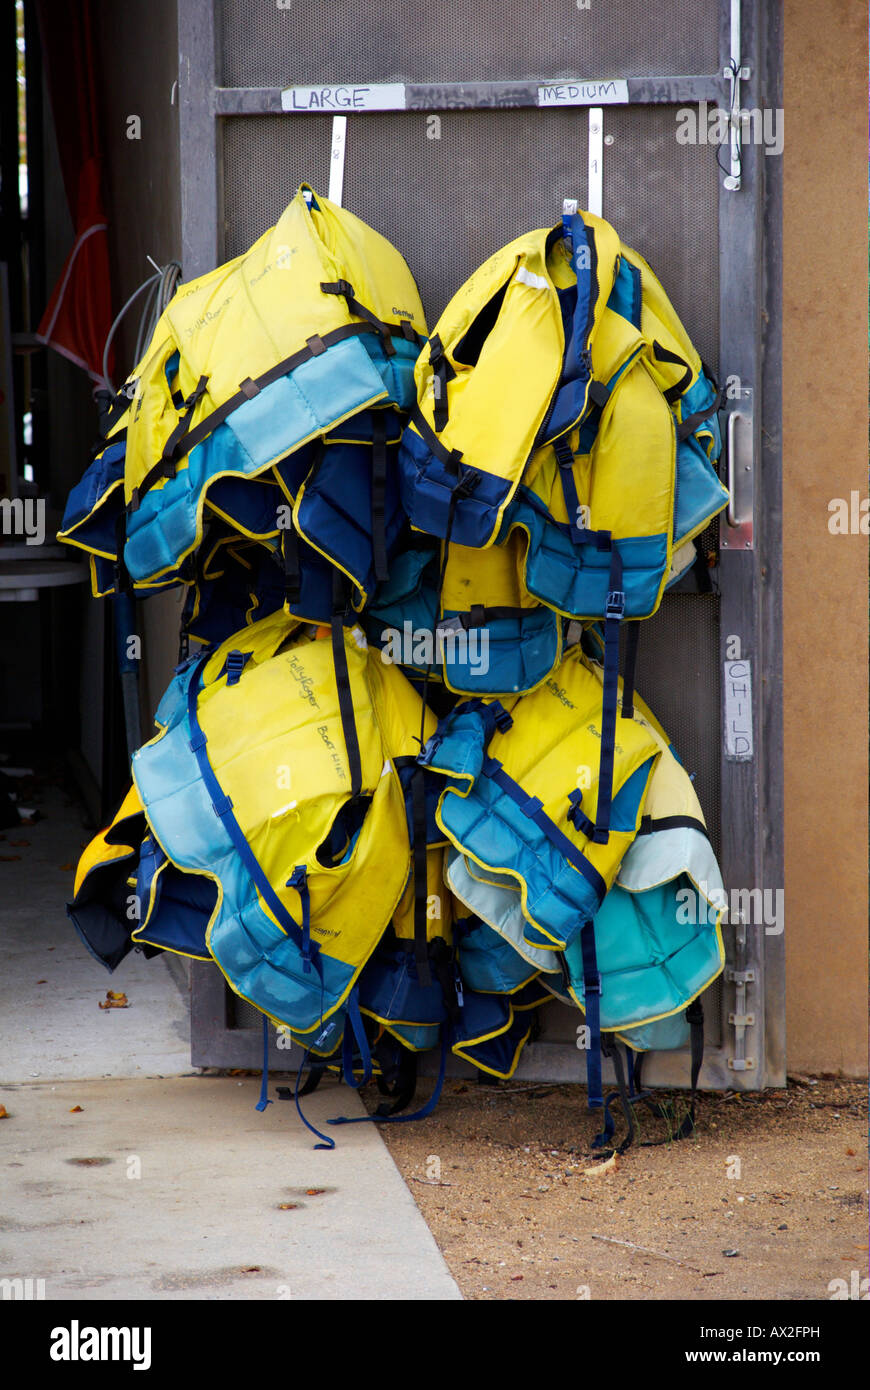 Life jackets hanging from the back of a door ready for use. Stock Photo